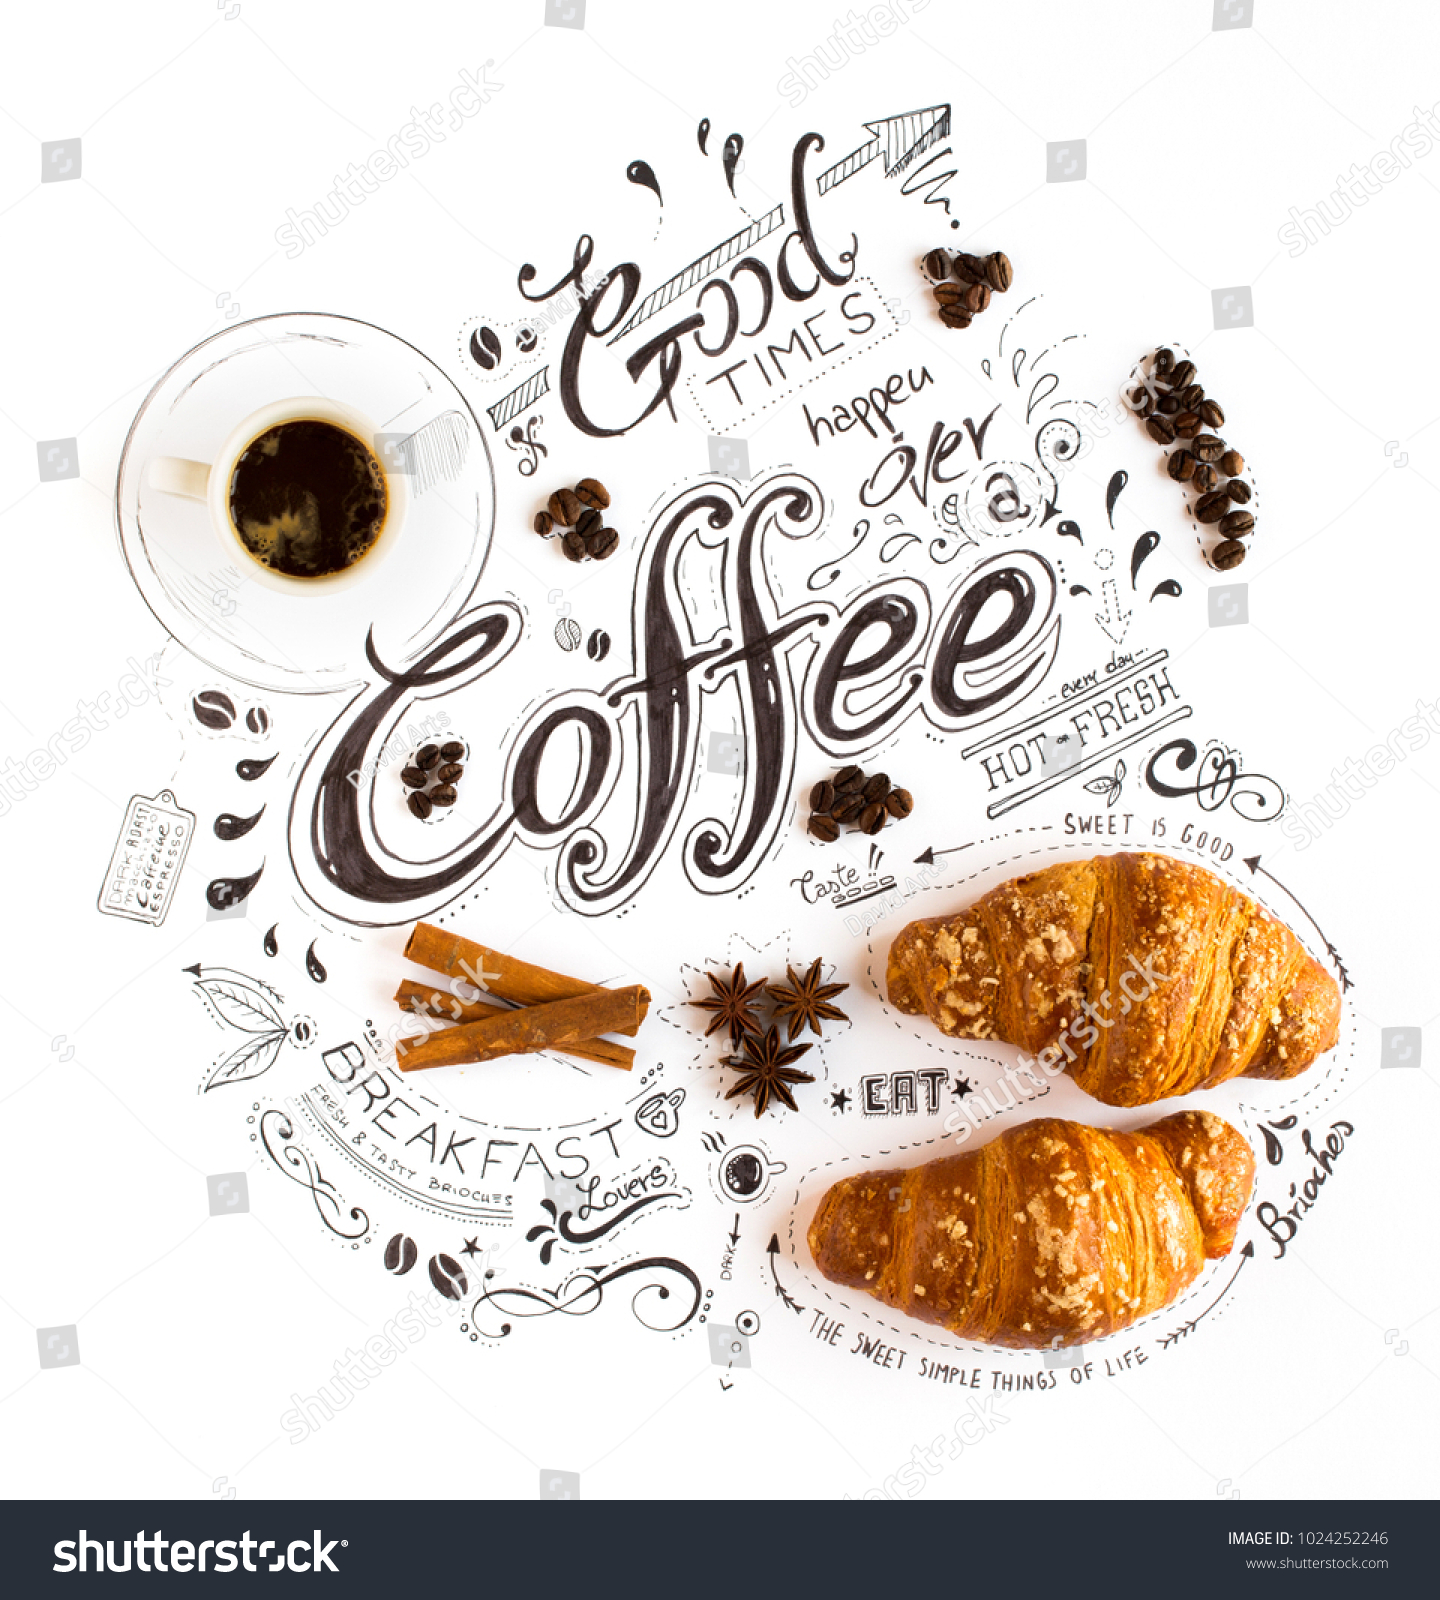 Hand Drawn Coffee Lettering Typography with various themed text, brioches, spices and coffee beens in a vintage composition. #1024252246